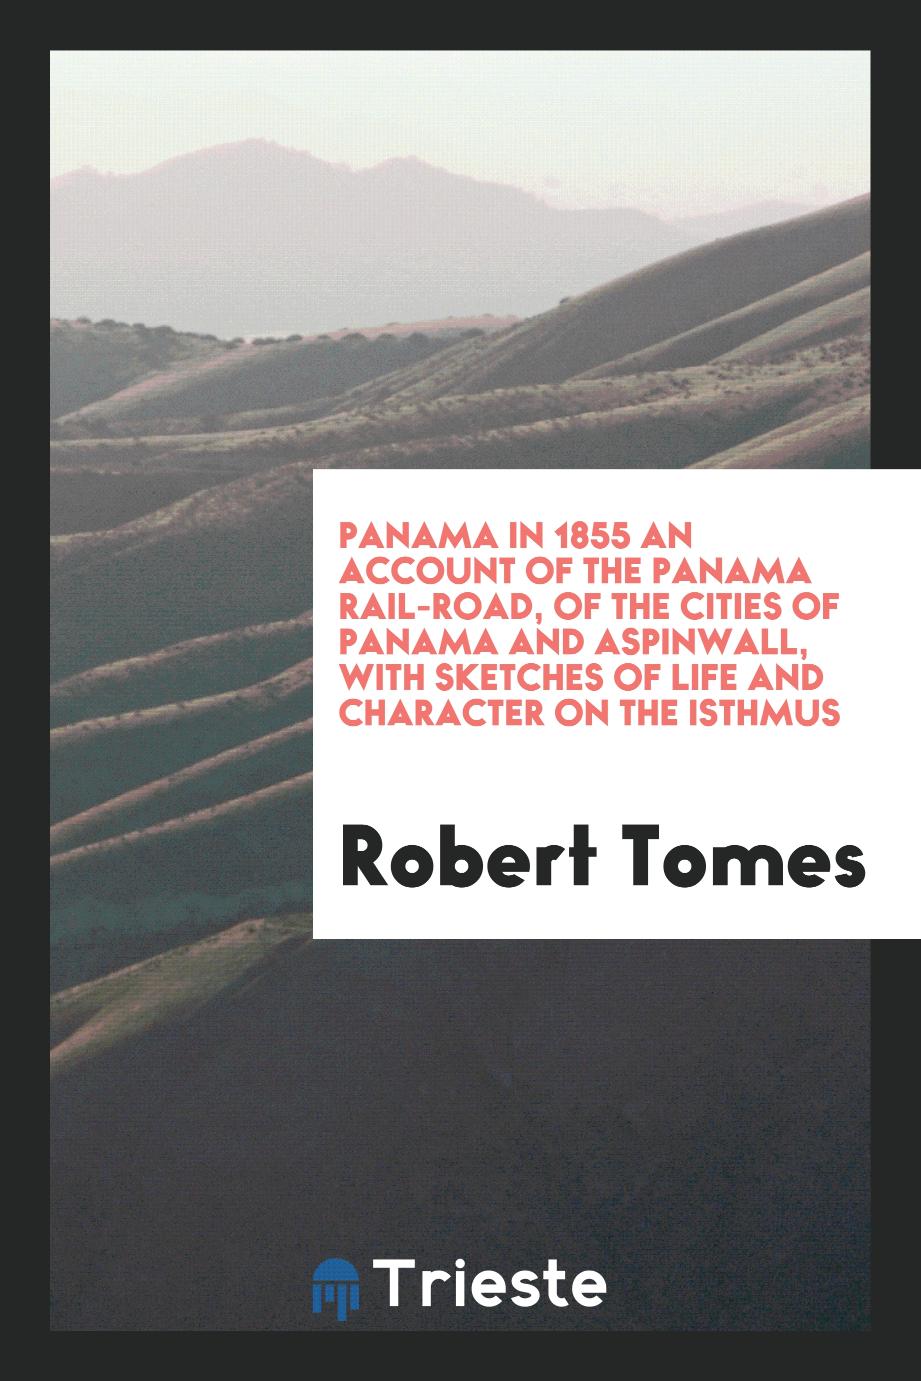 Panama in 1855 An account of the Panama rail-road, of the cities of Panama and Aspinwall, with sketches of life and character on the Isthmus